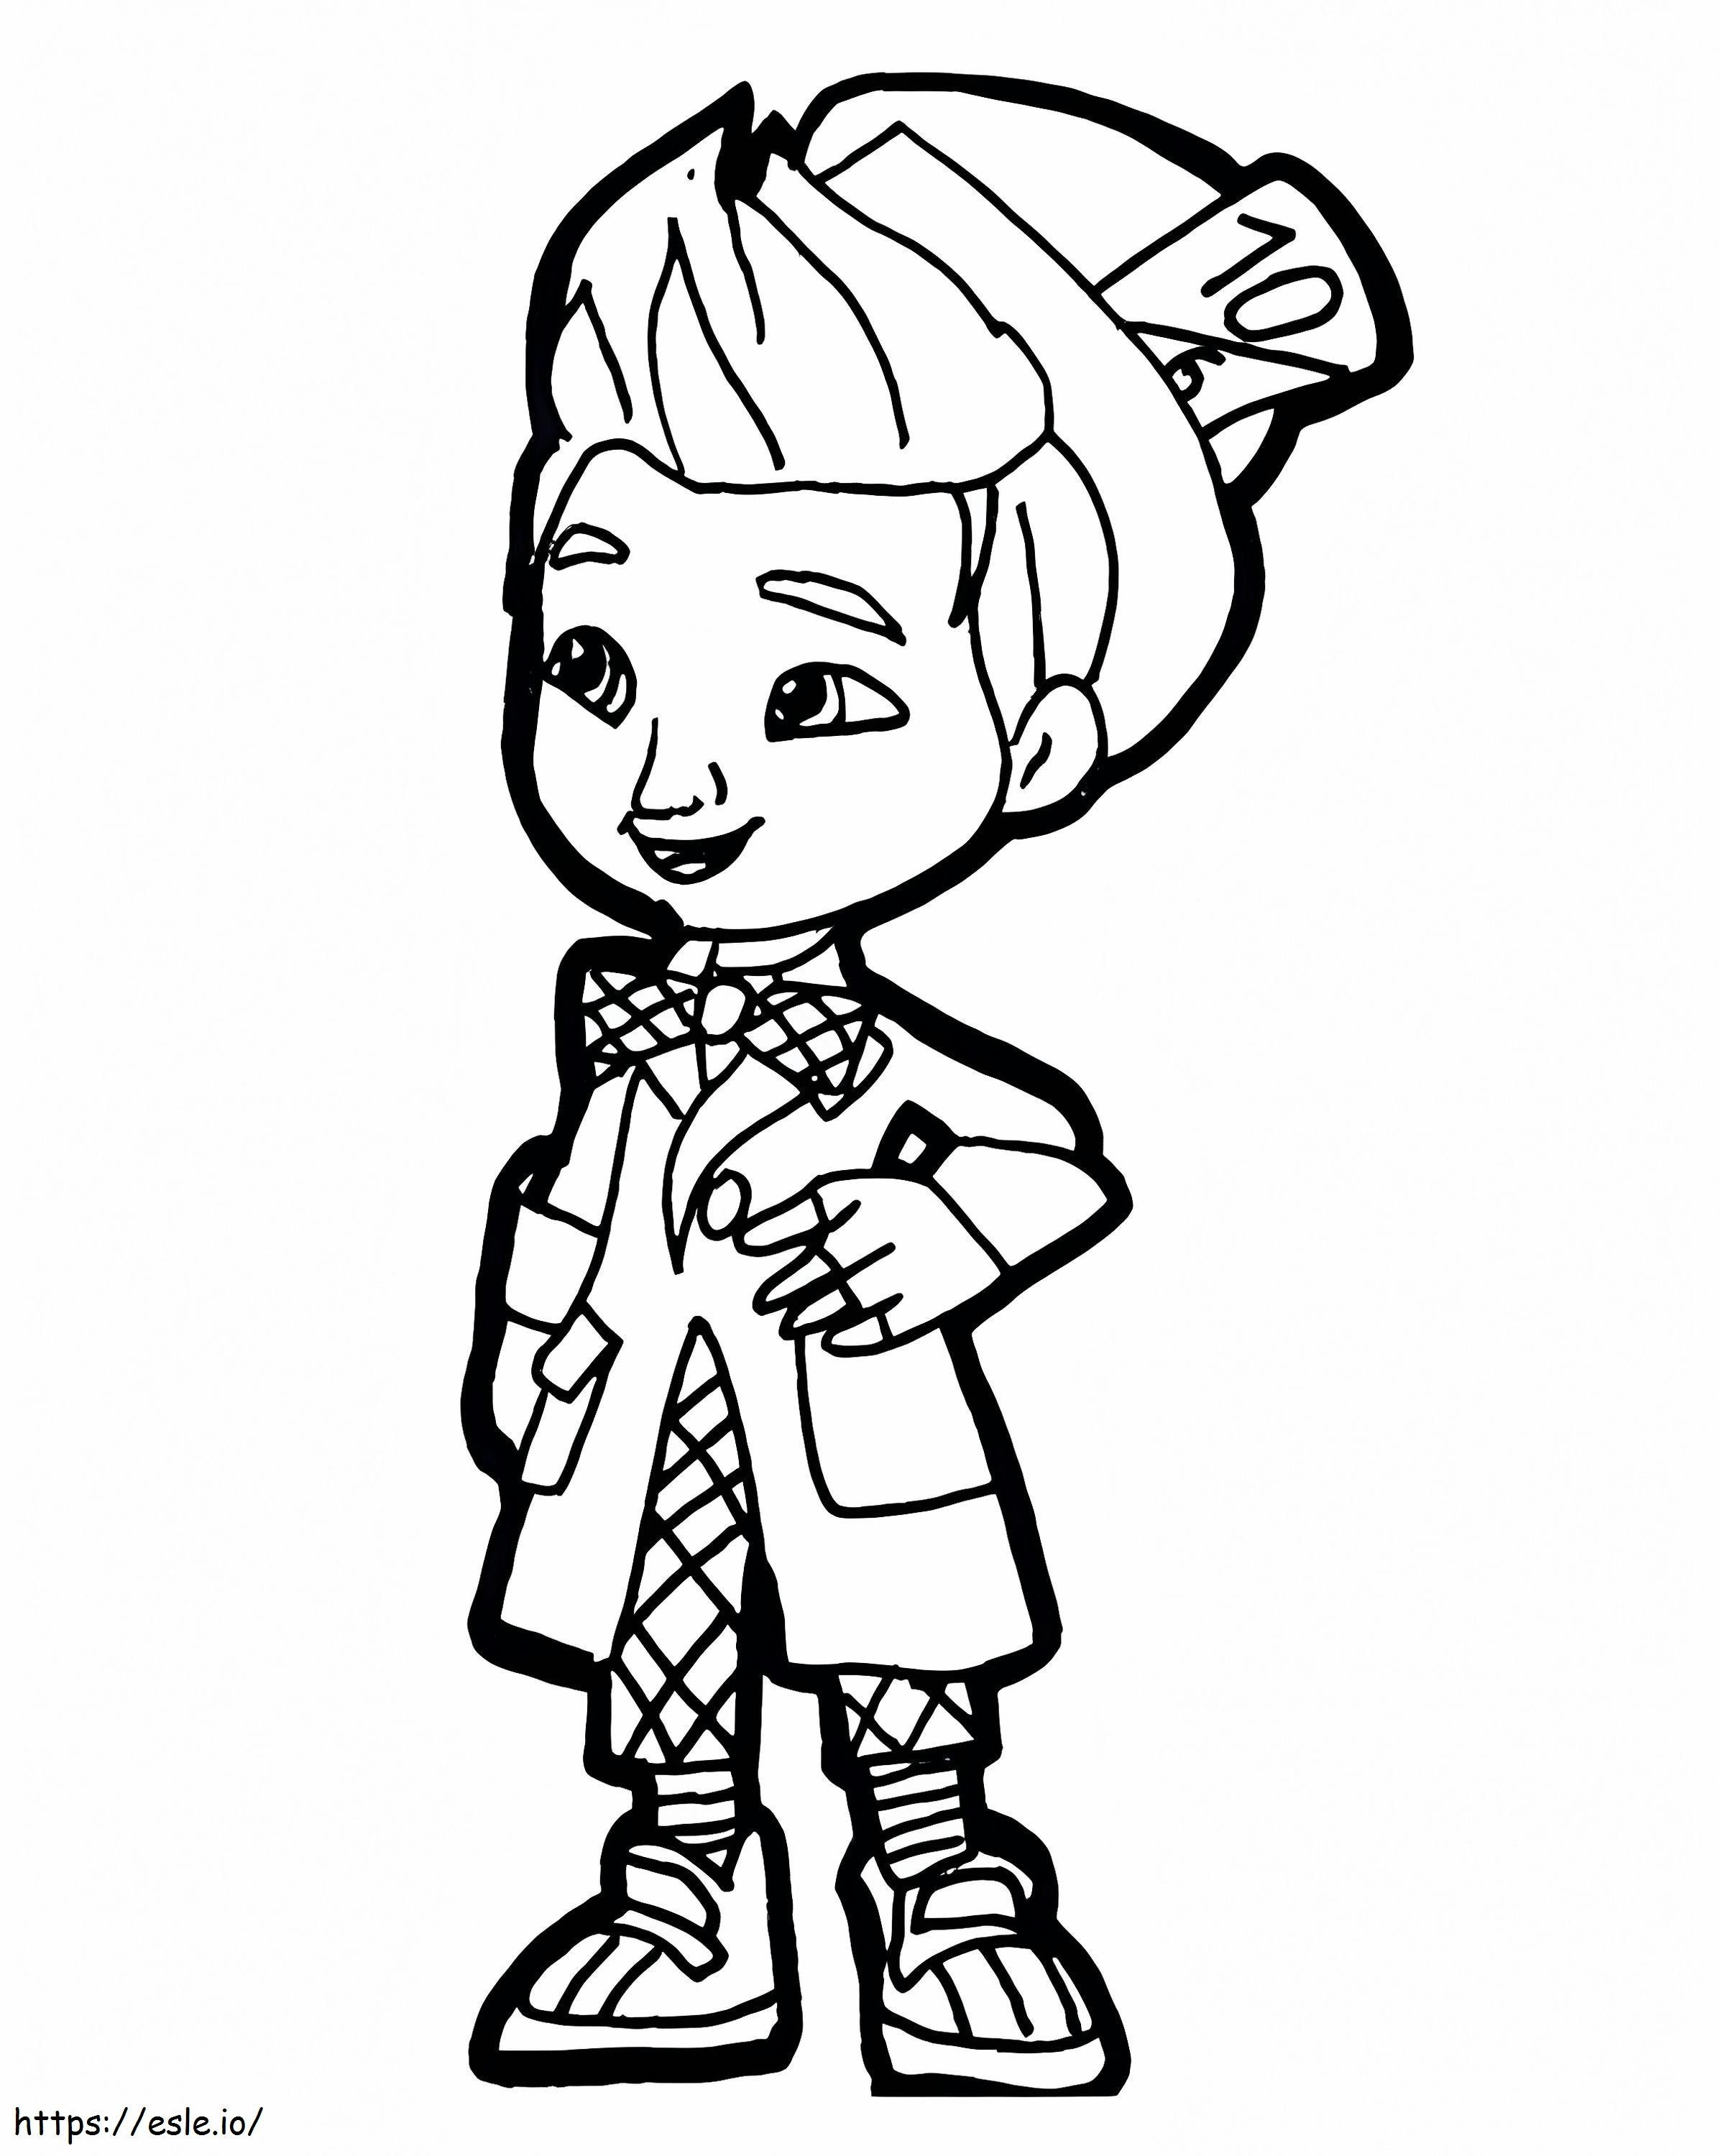 Hattie Hatter coloring page